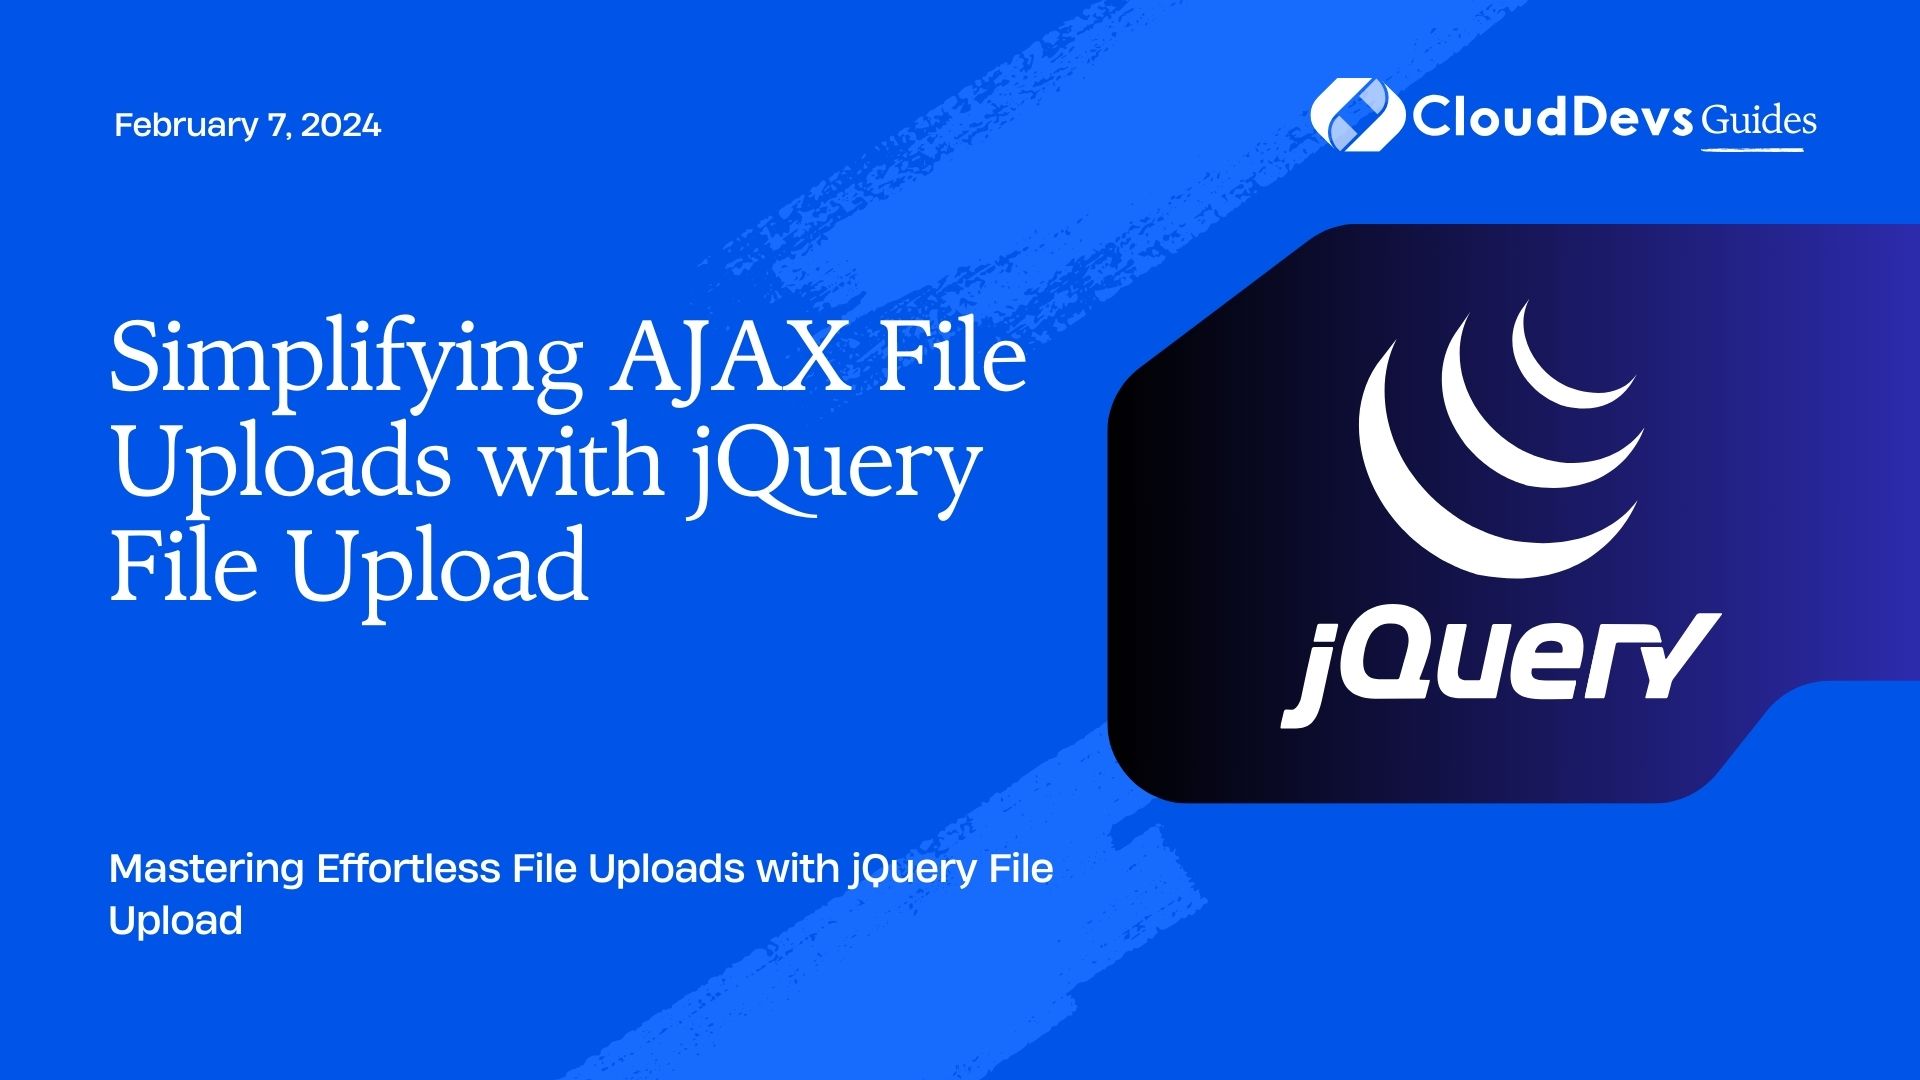 Simplifying AJAX File Uploads with jQuery File Upload